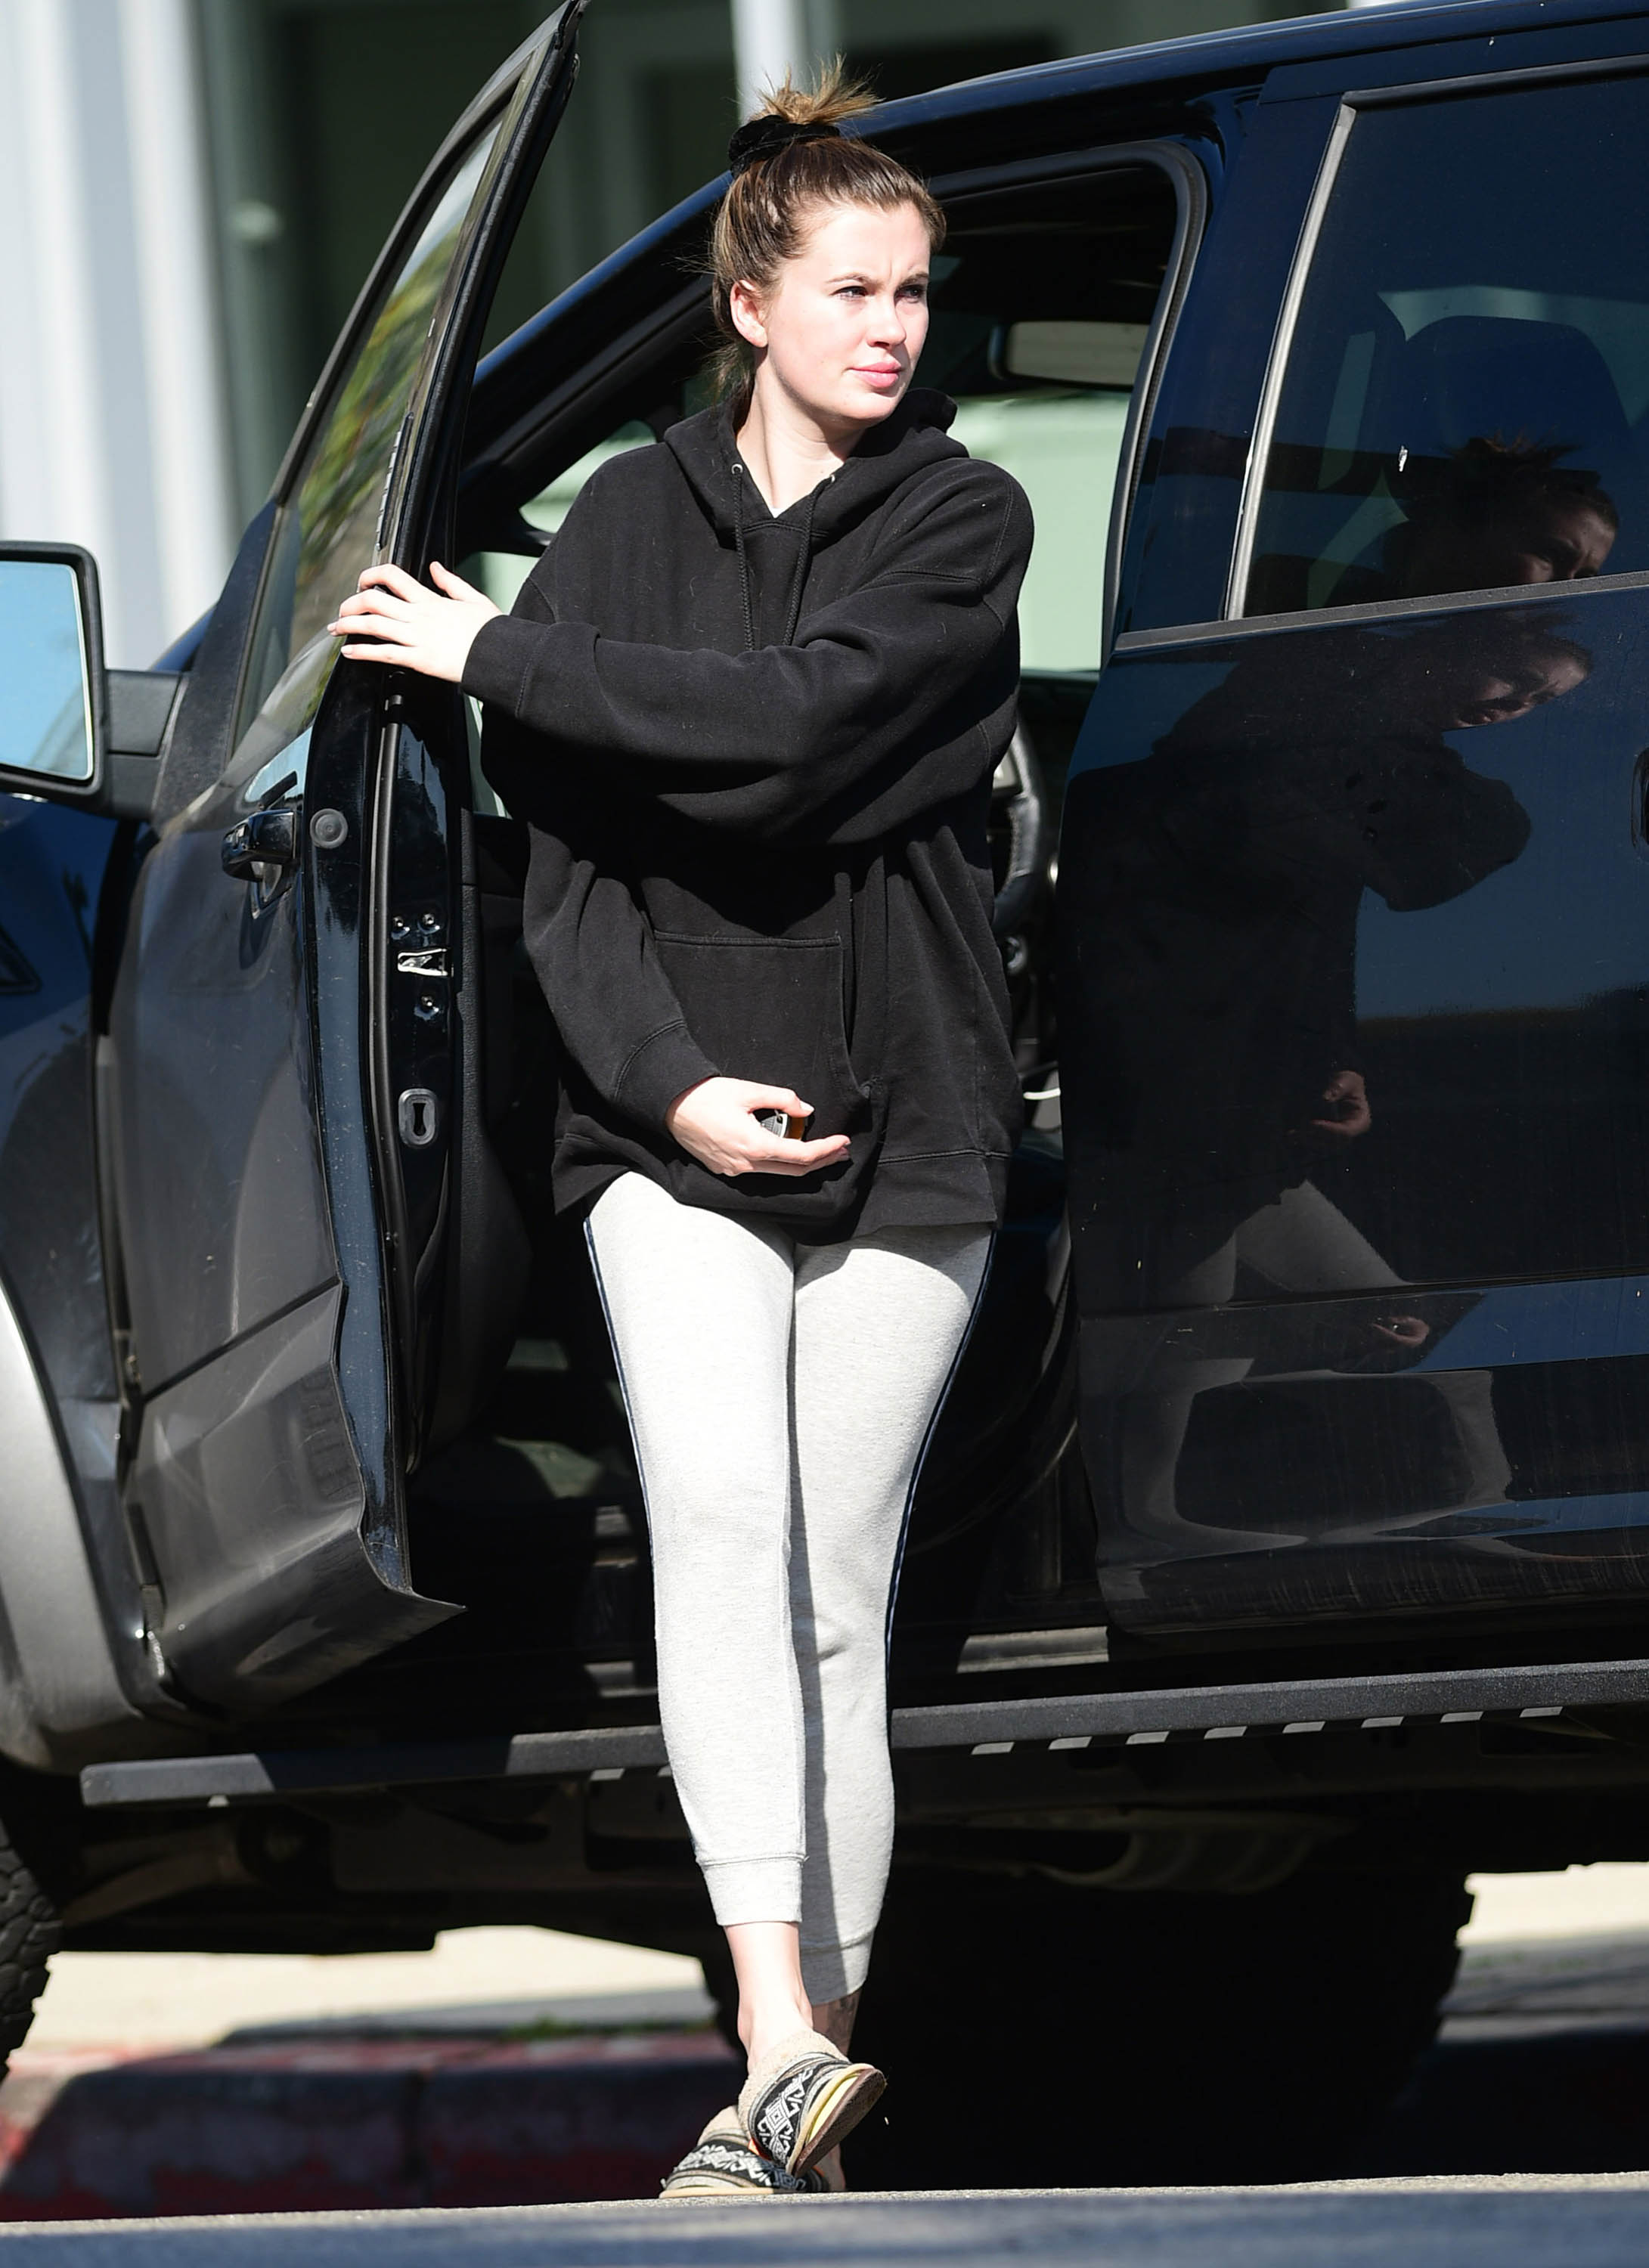 Ireland Baldwin in Los Angeles, California on February 8, 2020 | Source: Getty Images